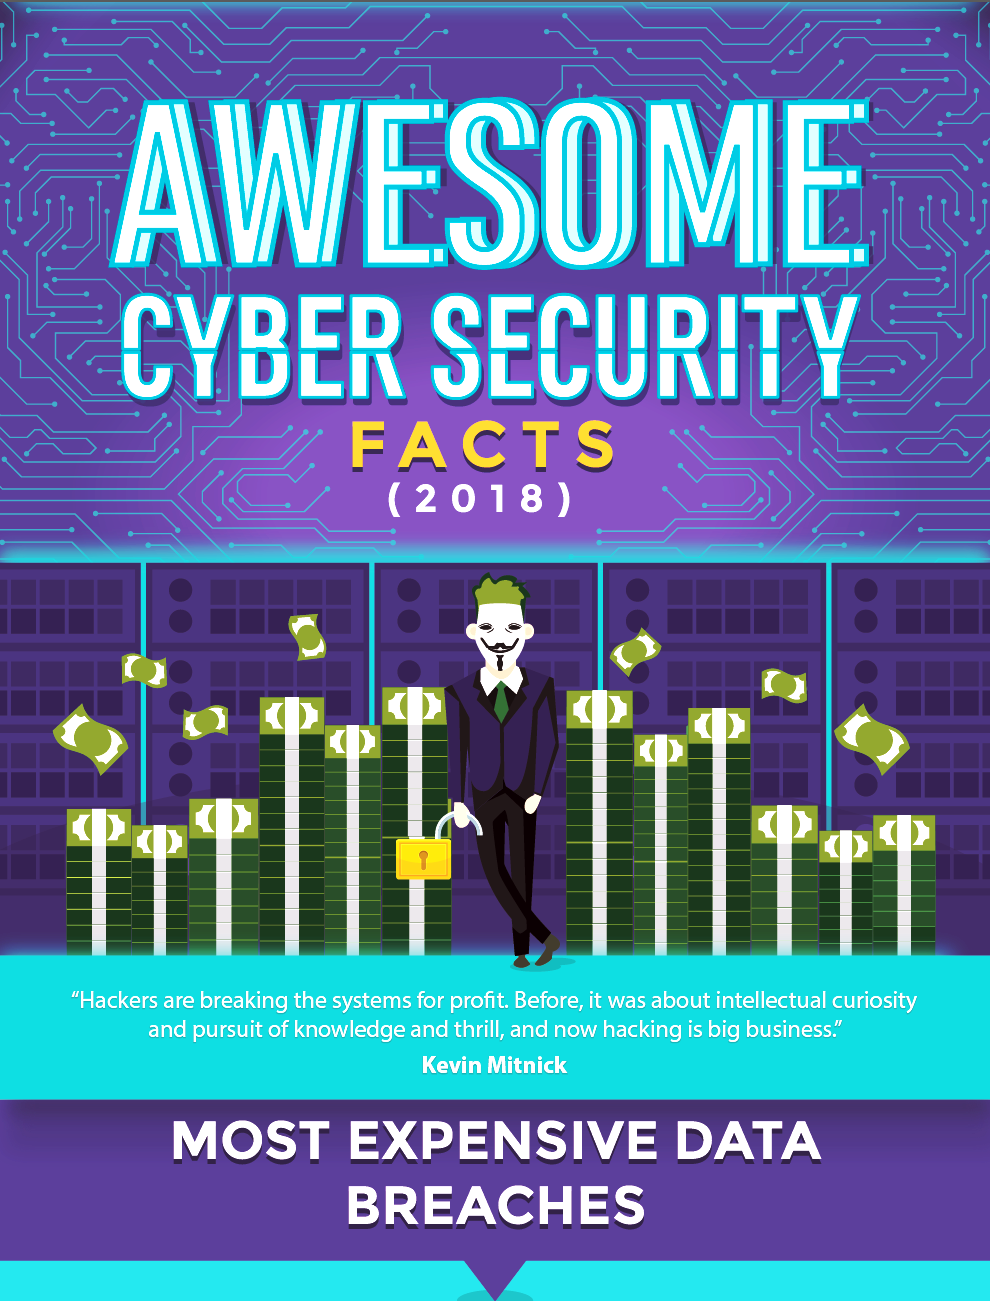 Awesome cyber security facts